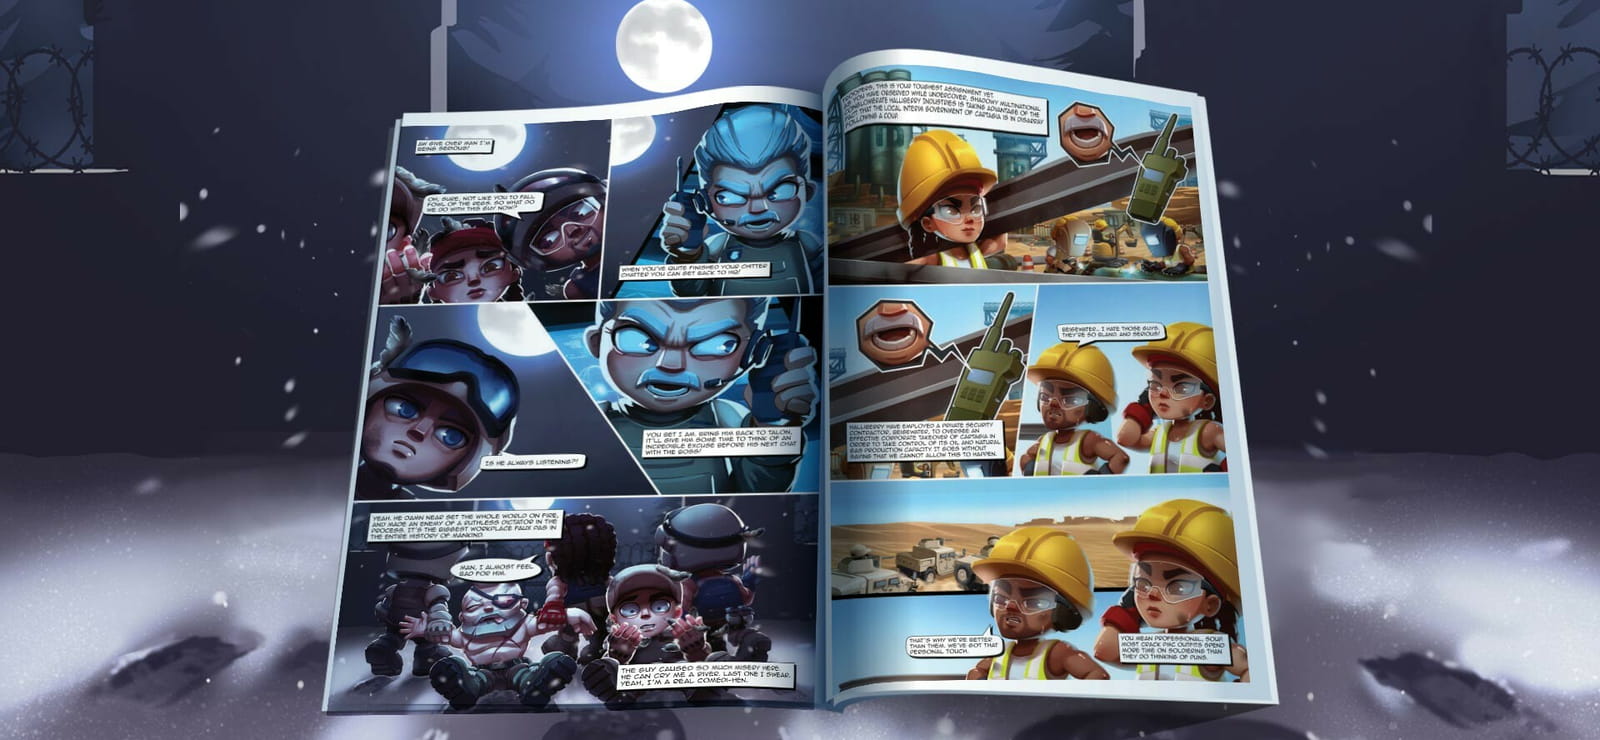 Tiny Troopers: Global Ops ‘Tiny Tales’ Comic Book